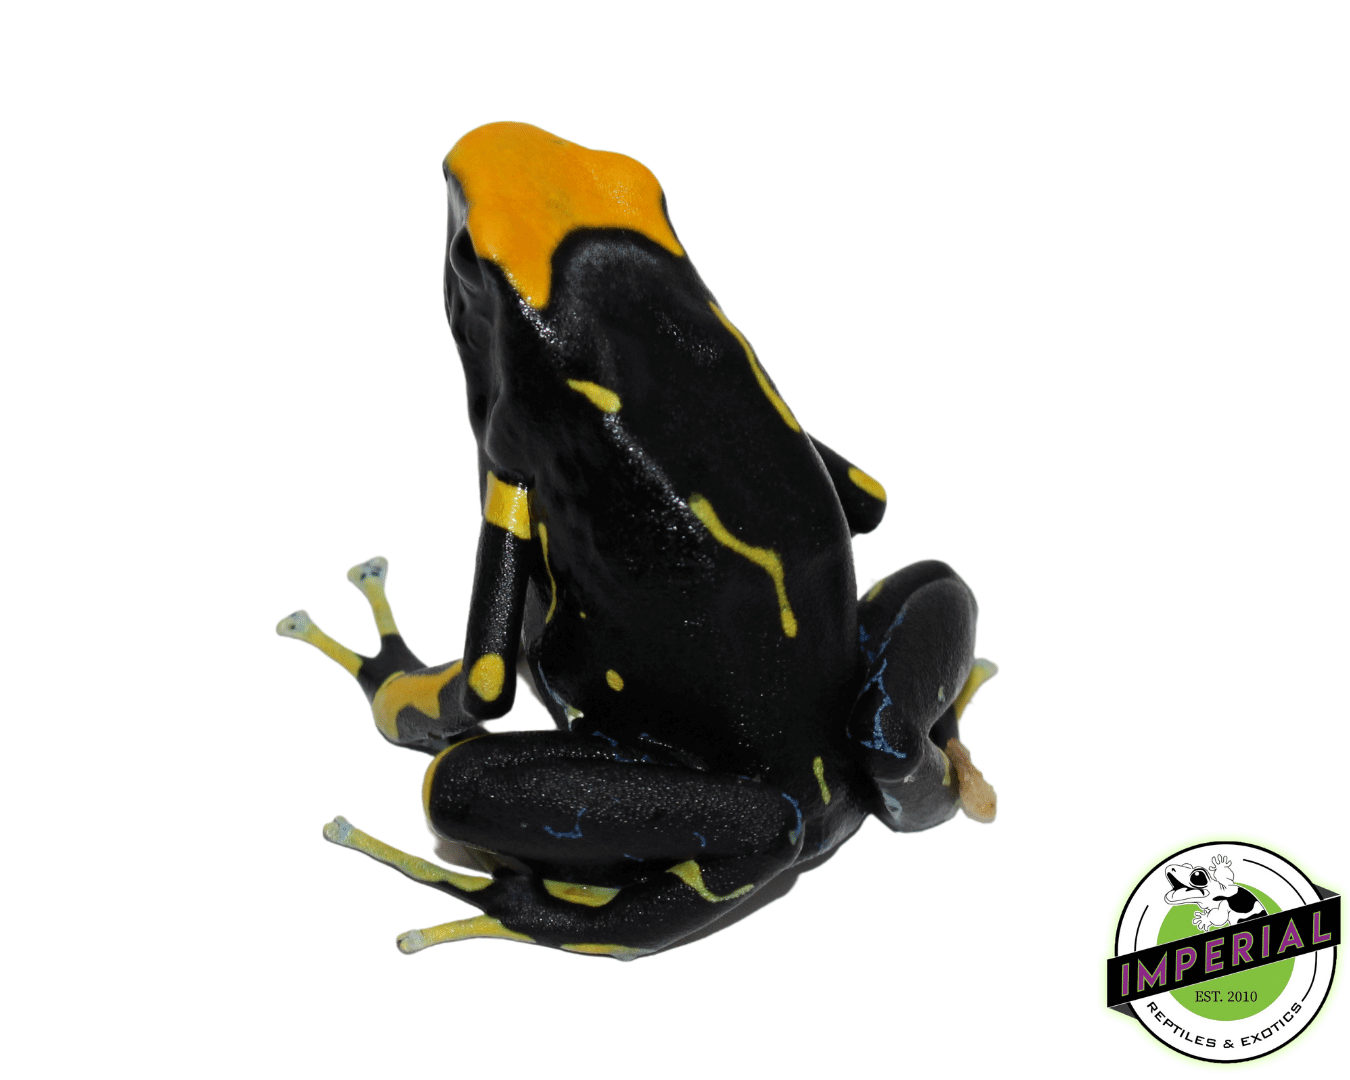 alanis poison dart frog for sale, buy reptiles online